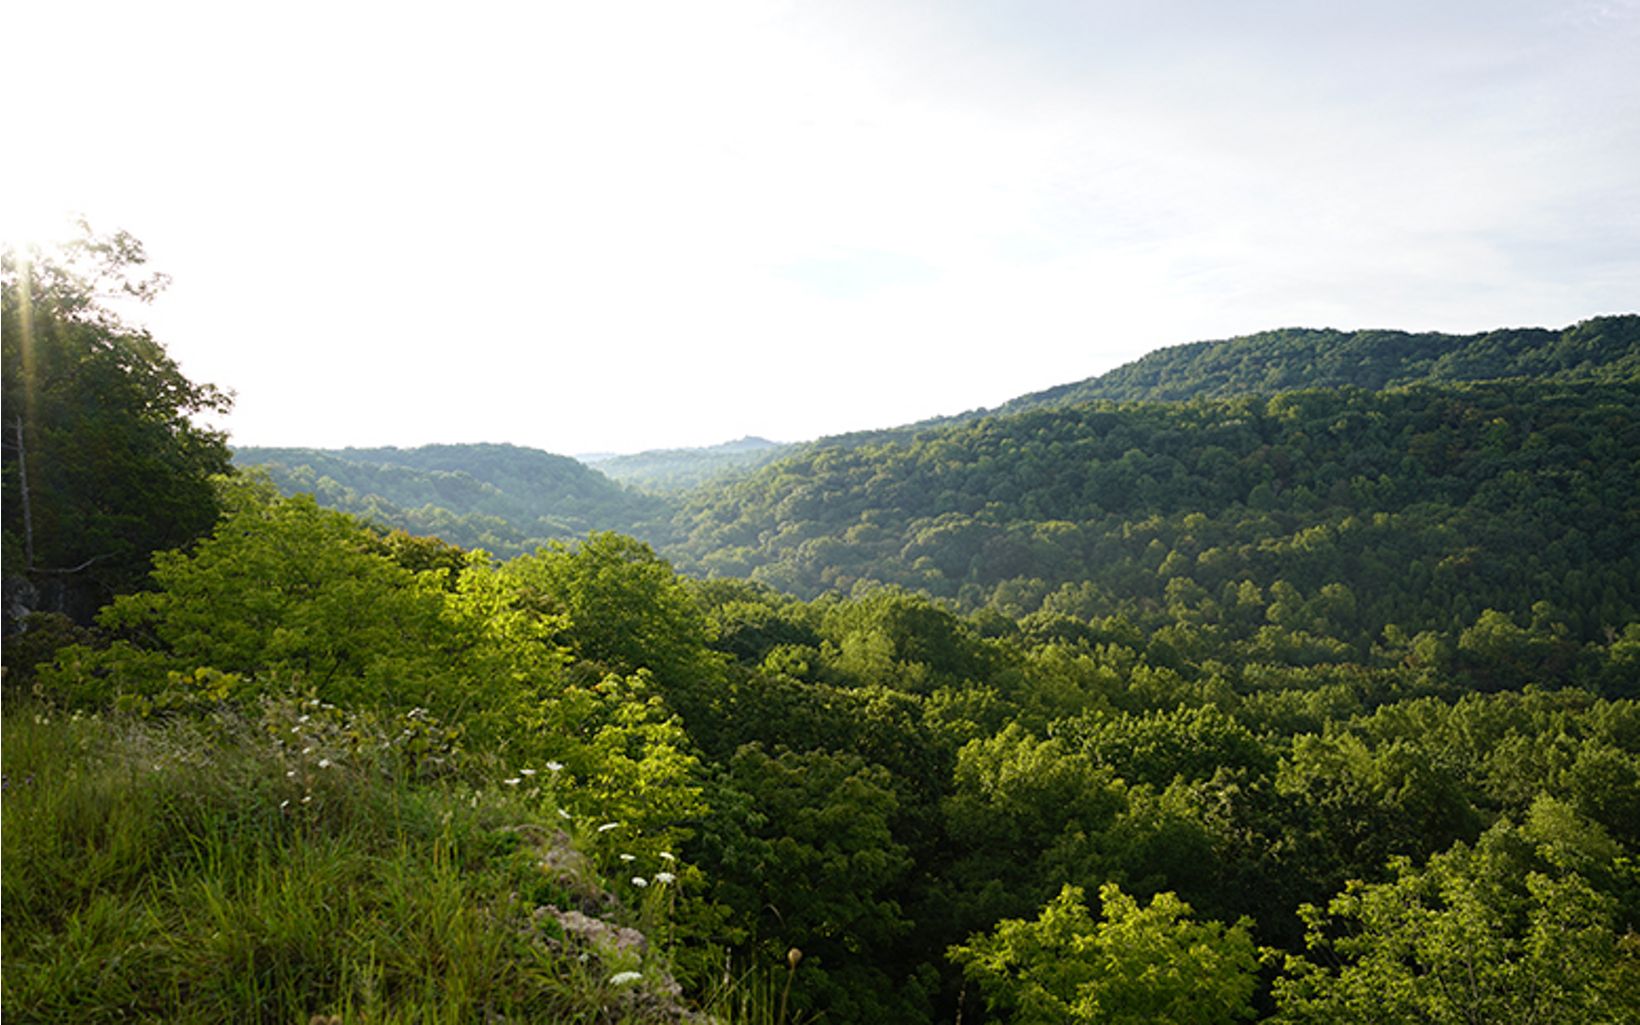 Looking over the hills of Southern Ohio that are covered in lush green forests on a sunny day.